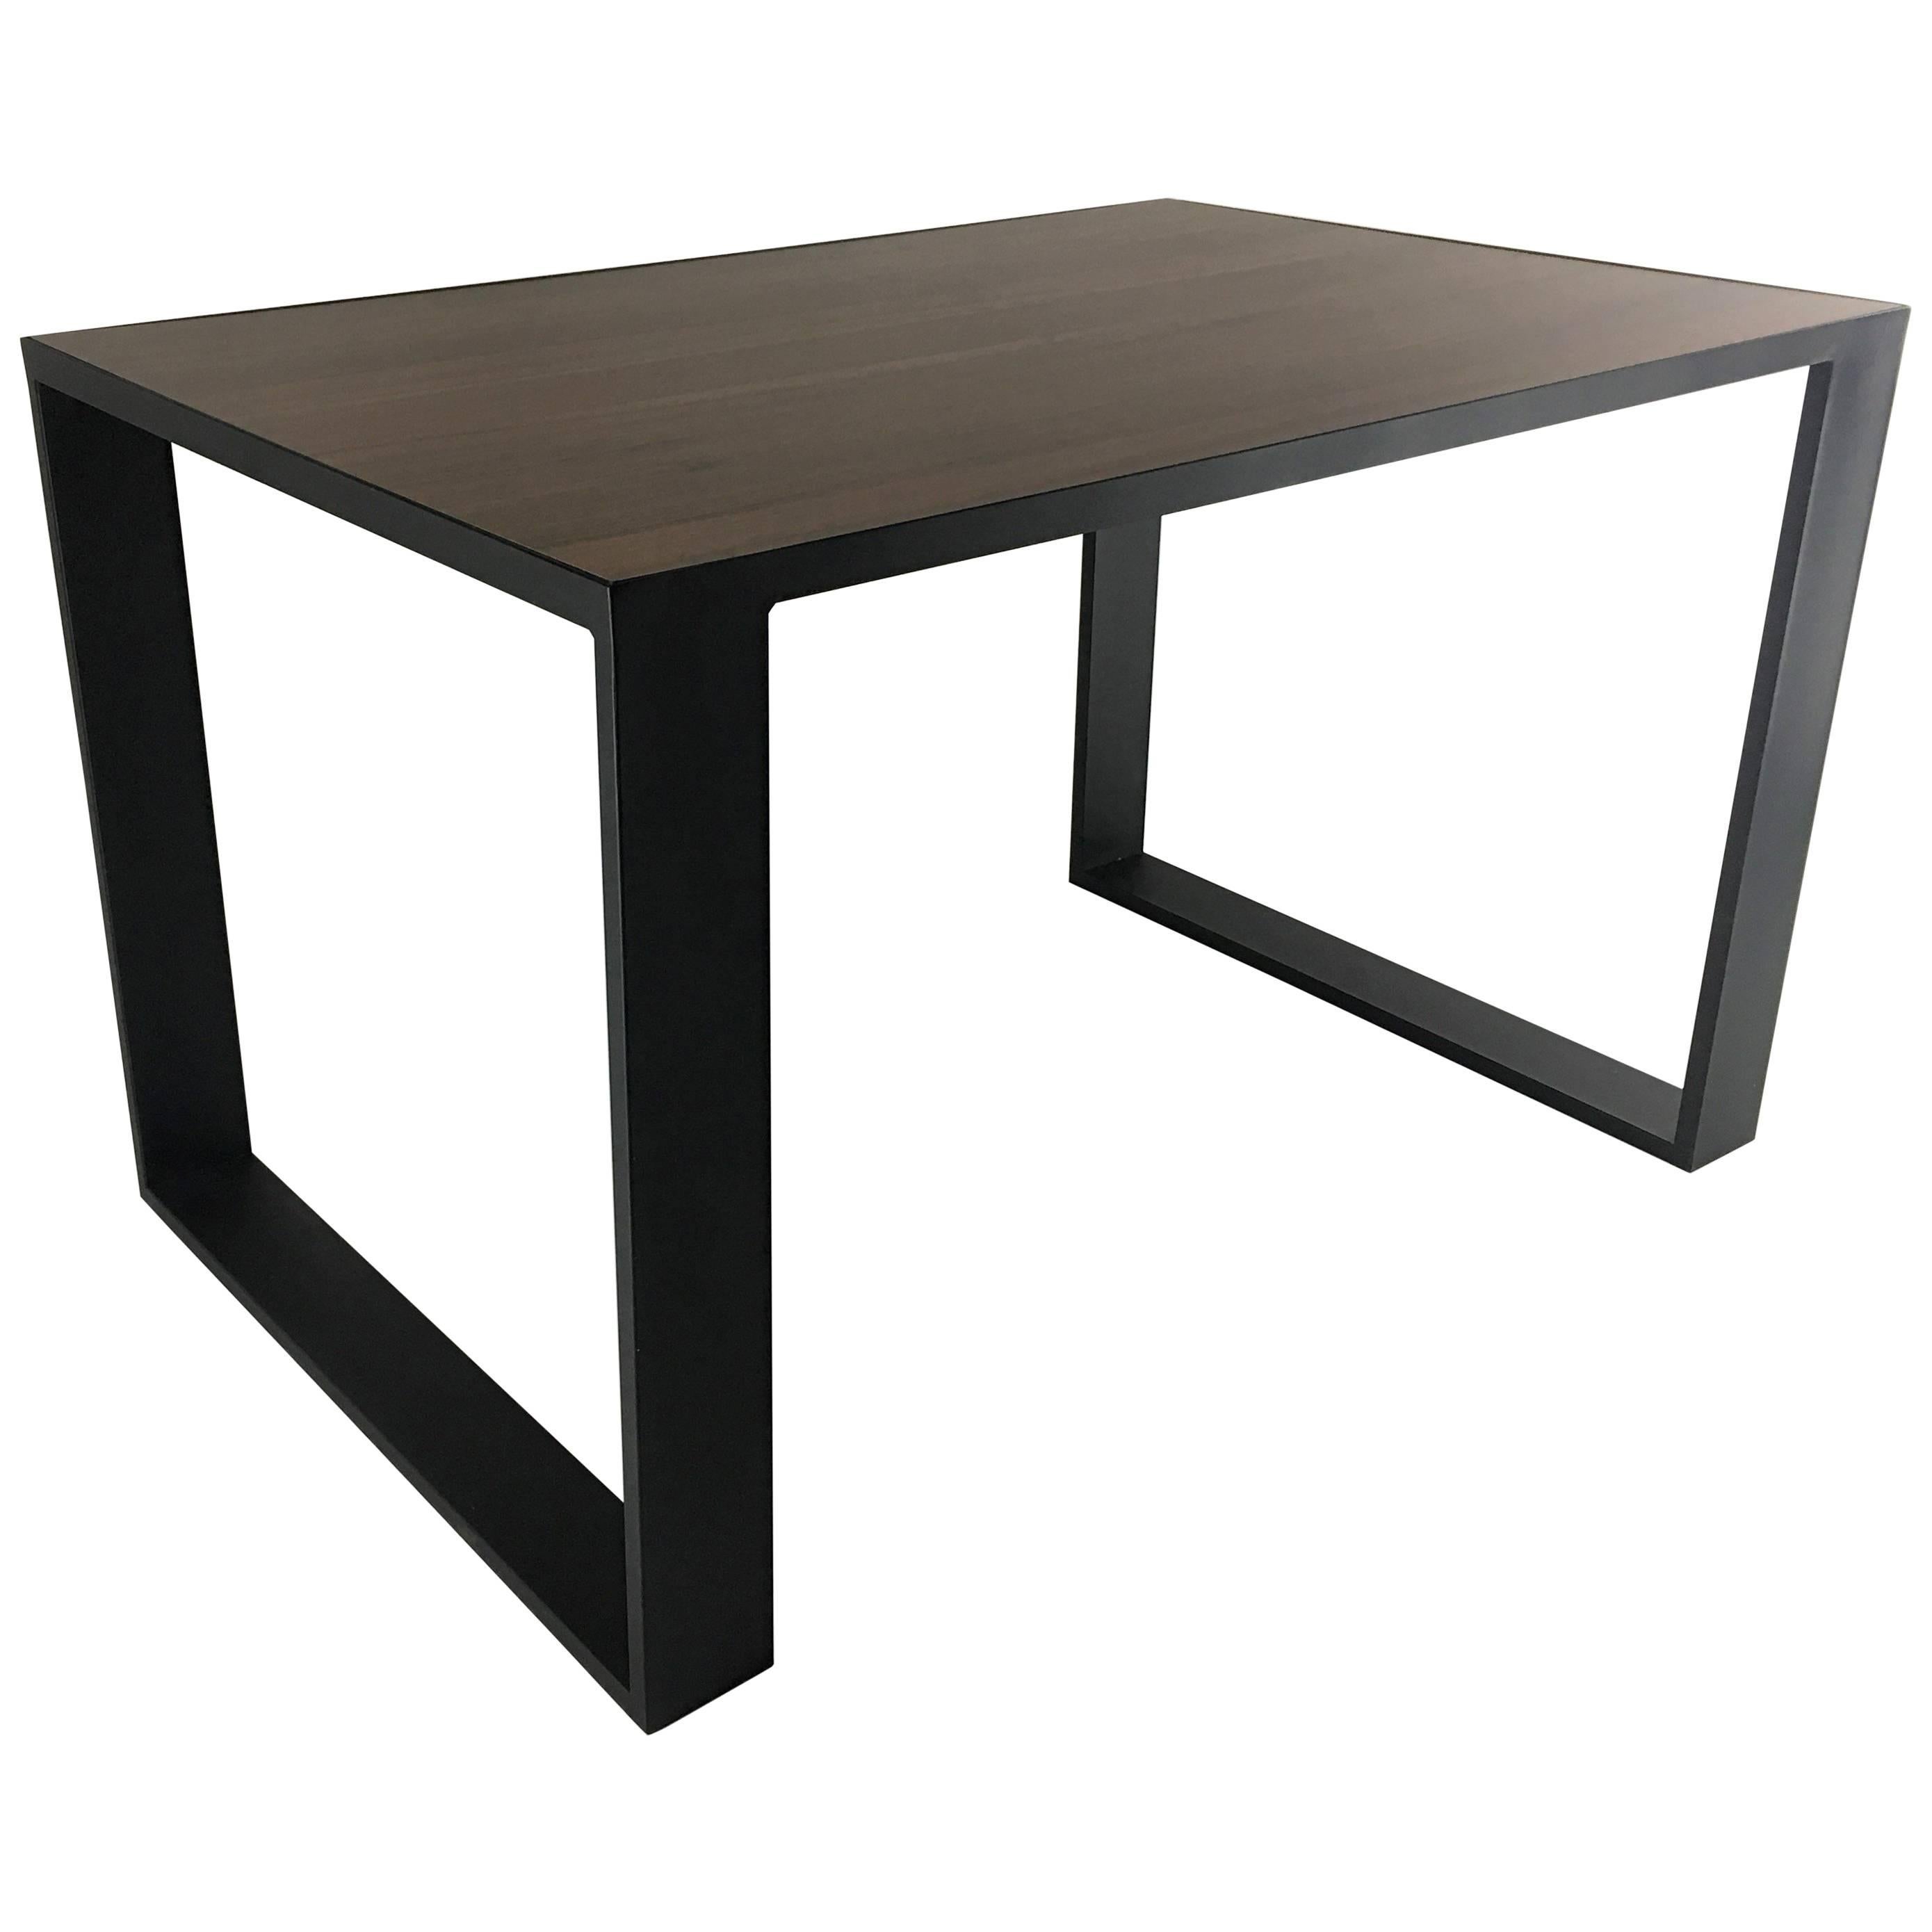 Rectangular Iron Cube Table with Embedded Wood Top, Dinner or Desk Table